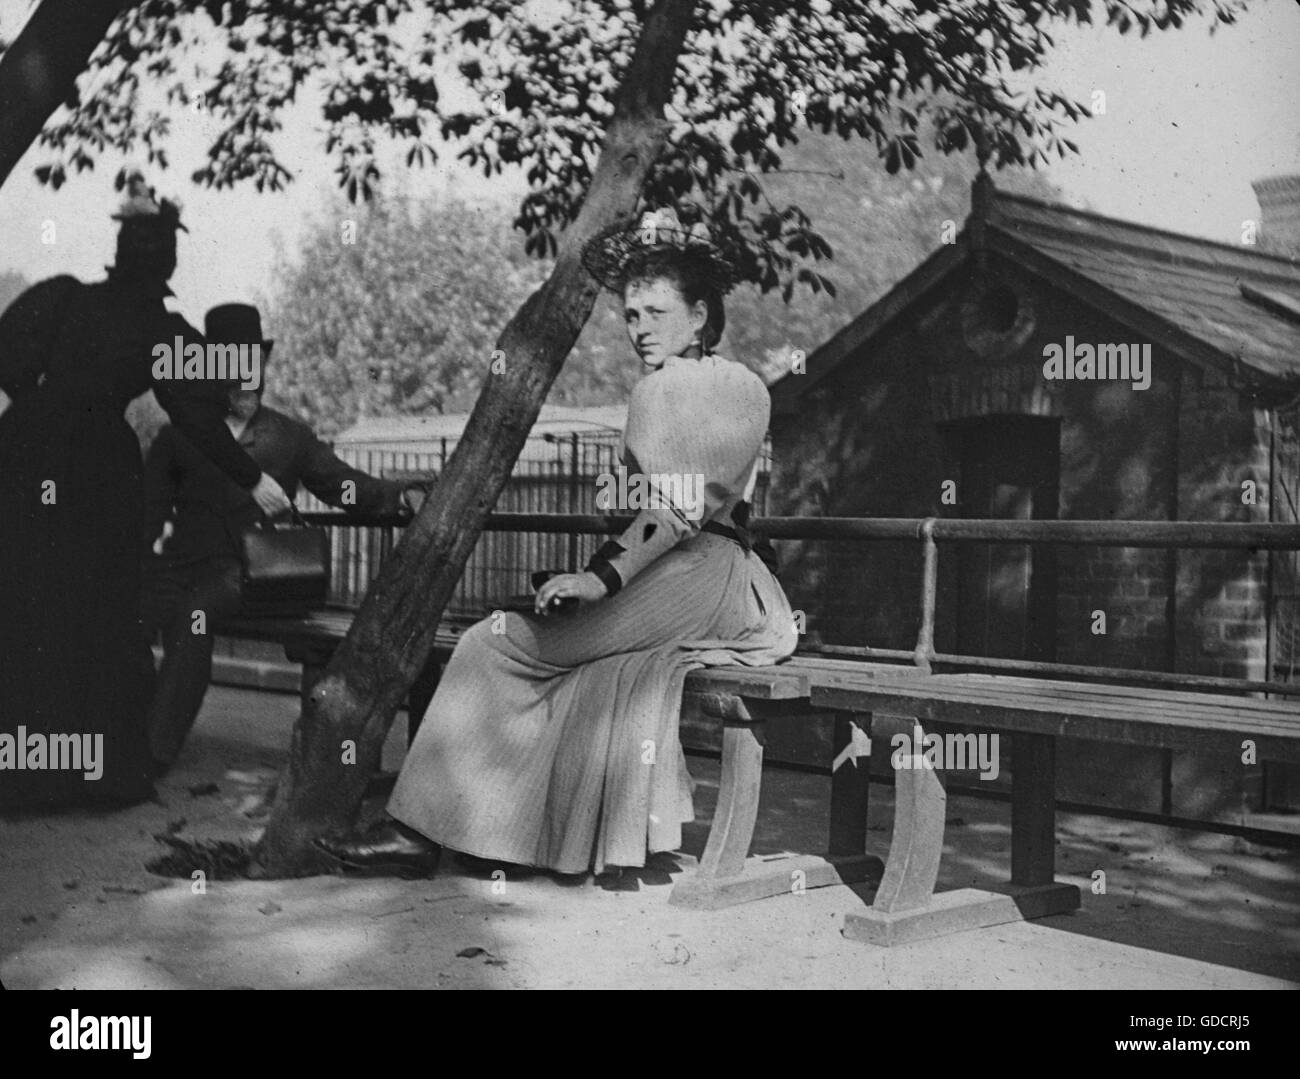 Candid portrait of a stunning young woman in hat and dress design with pooled natural lighting sitting on a bench. Amateur holiday photos c1899, venue appears to be Hastings. Photograph by Tony Henshaw - Taken from early original glass slides (original positive images). FROM THE 1899 HASTINGS FAMILY COLLECTION Stock Photo